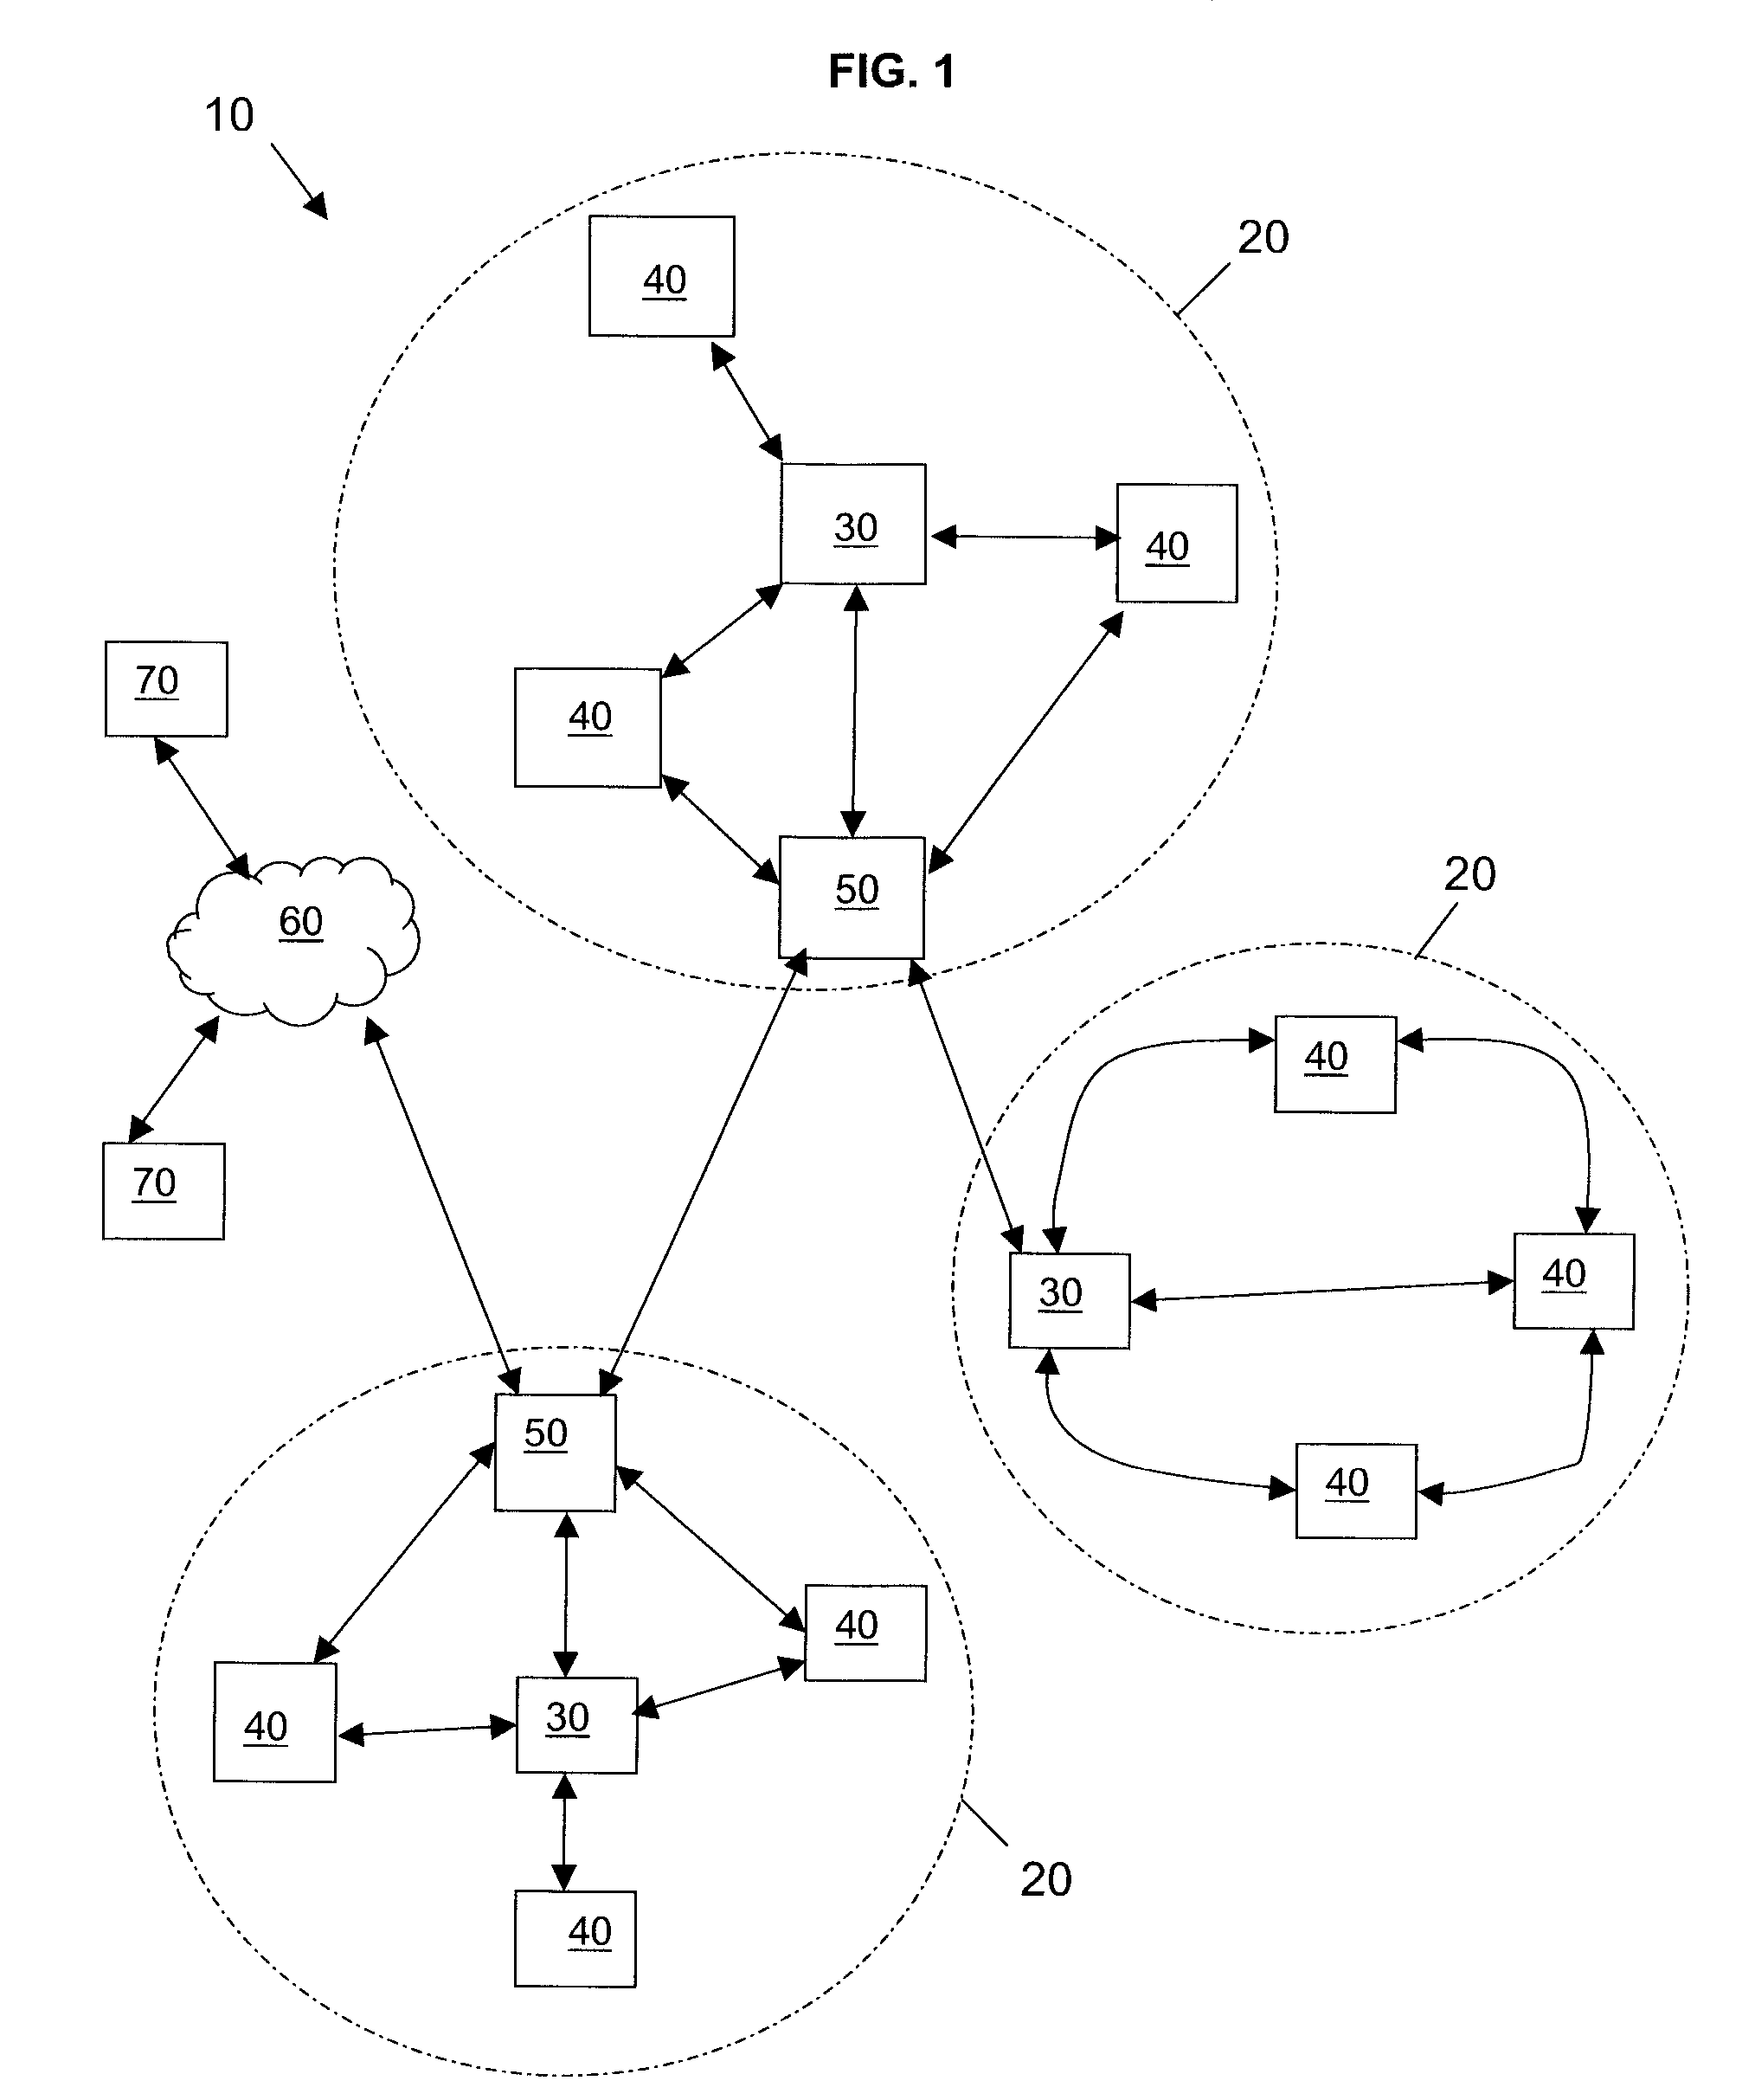 Hash-based access to resources in a data processing network